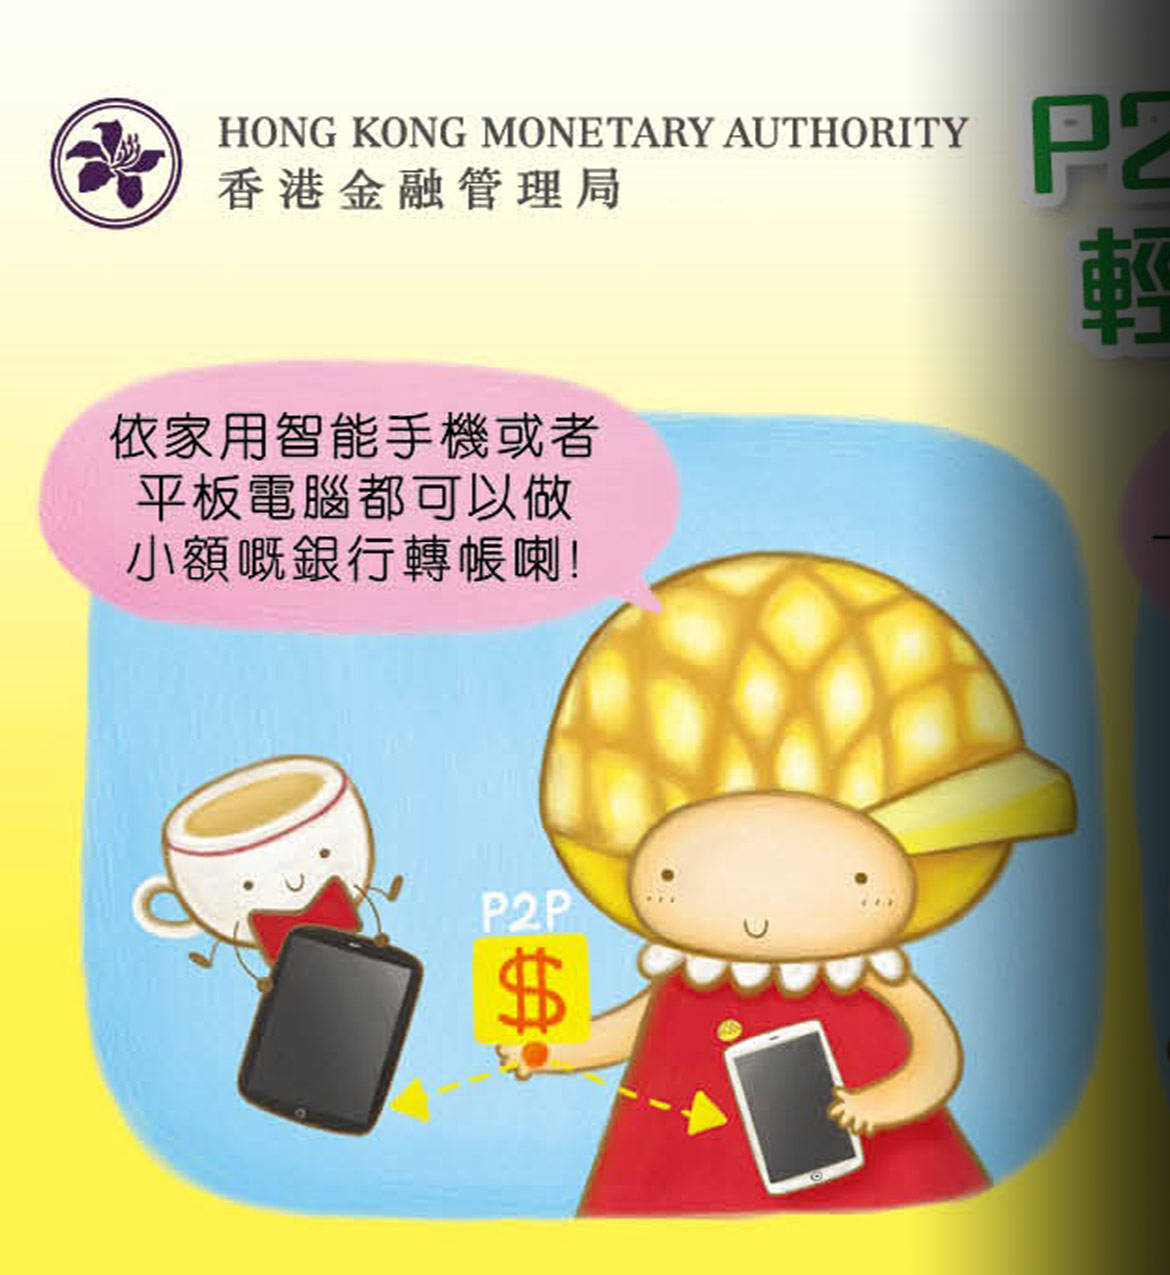 Comics - P2P Small-Value Funds Transfer Service (Chinese only)